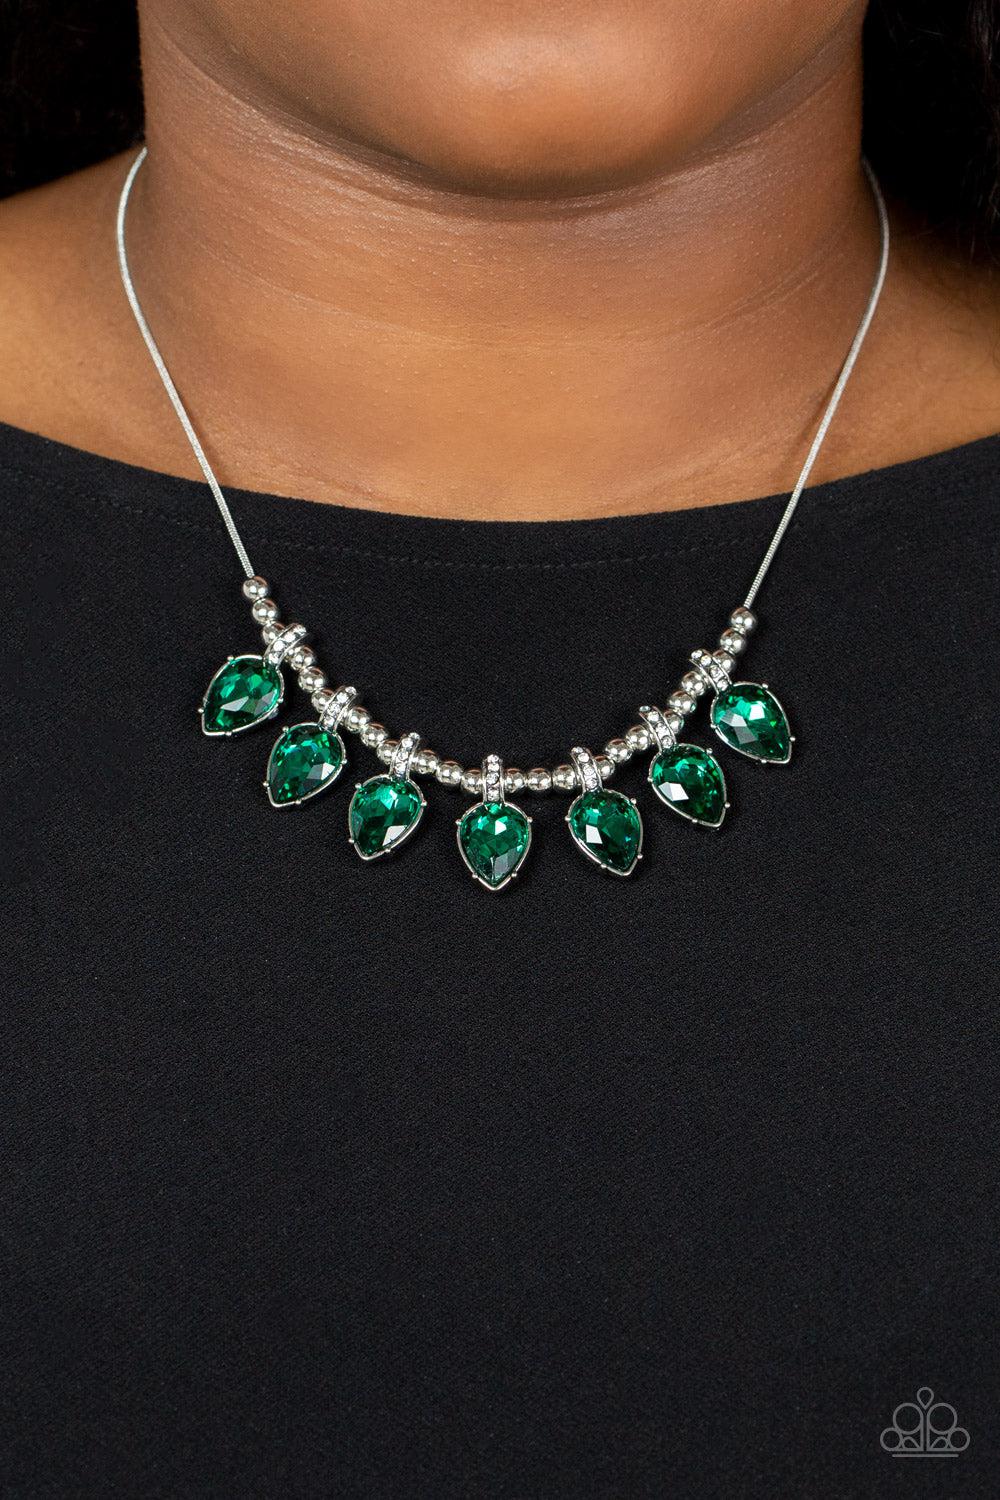 Crown Jewel Couture Green Rhinestone Necklace - Paparazzi Accessories- on model - CarasShop.com - $5 Jewelry by Cara Jewels